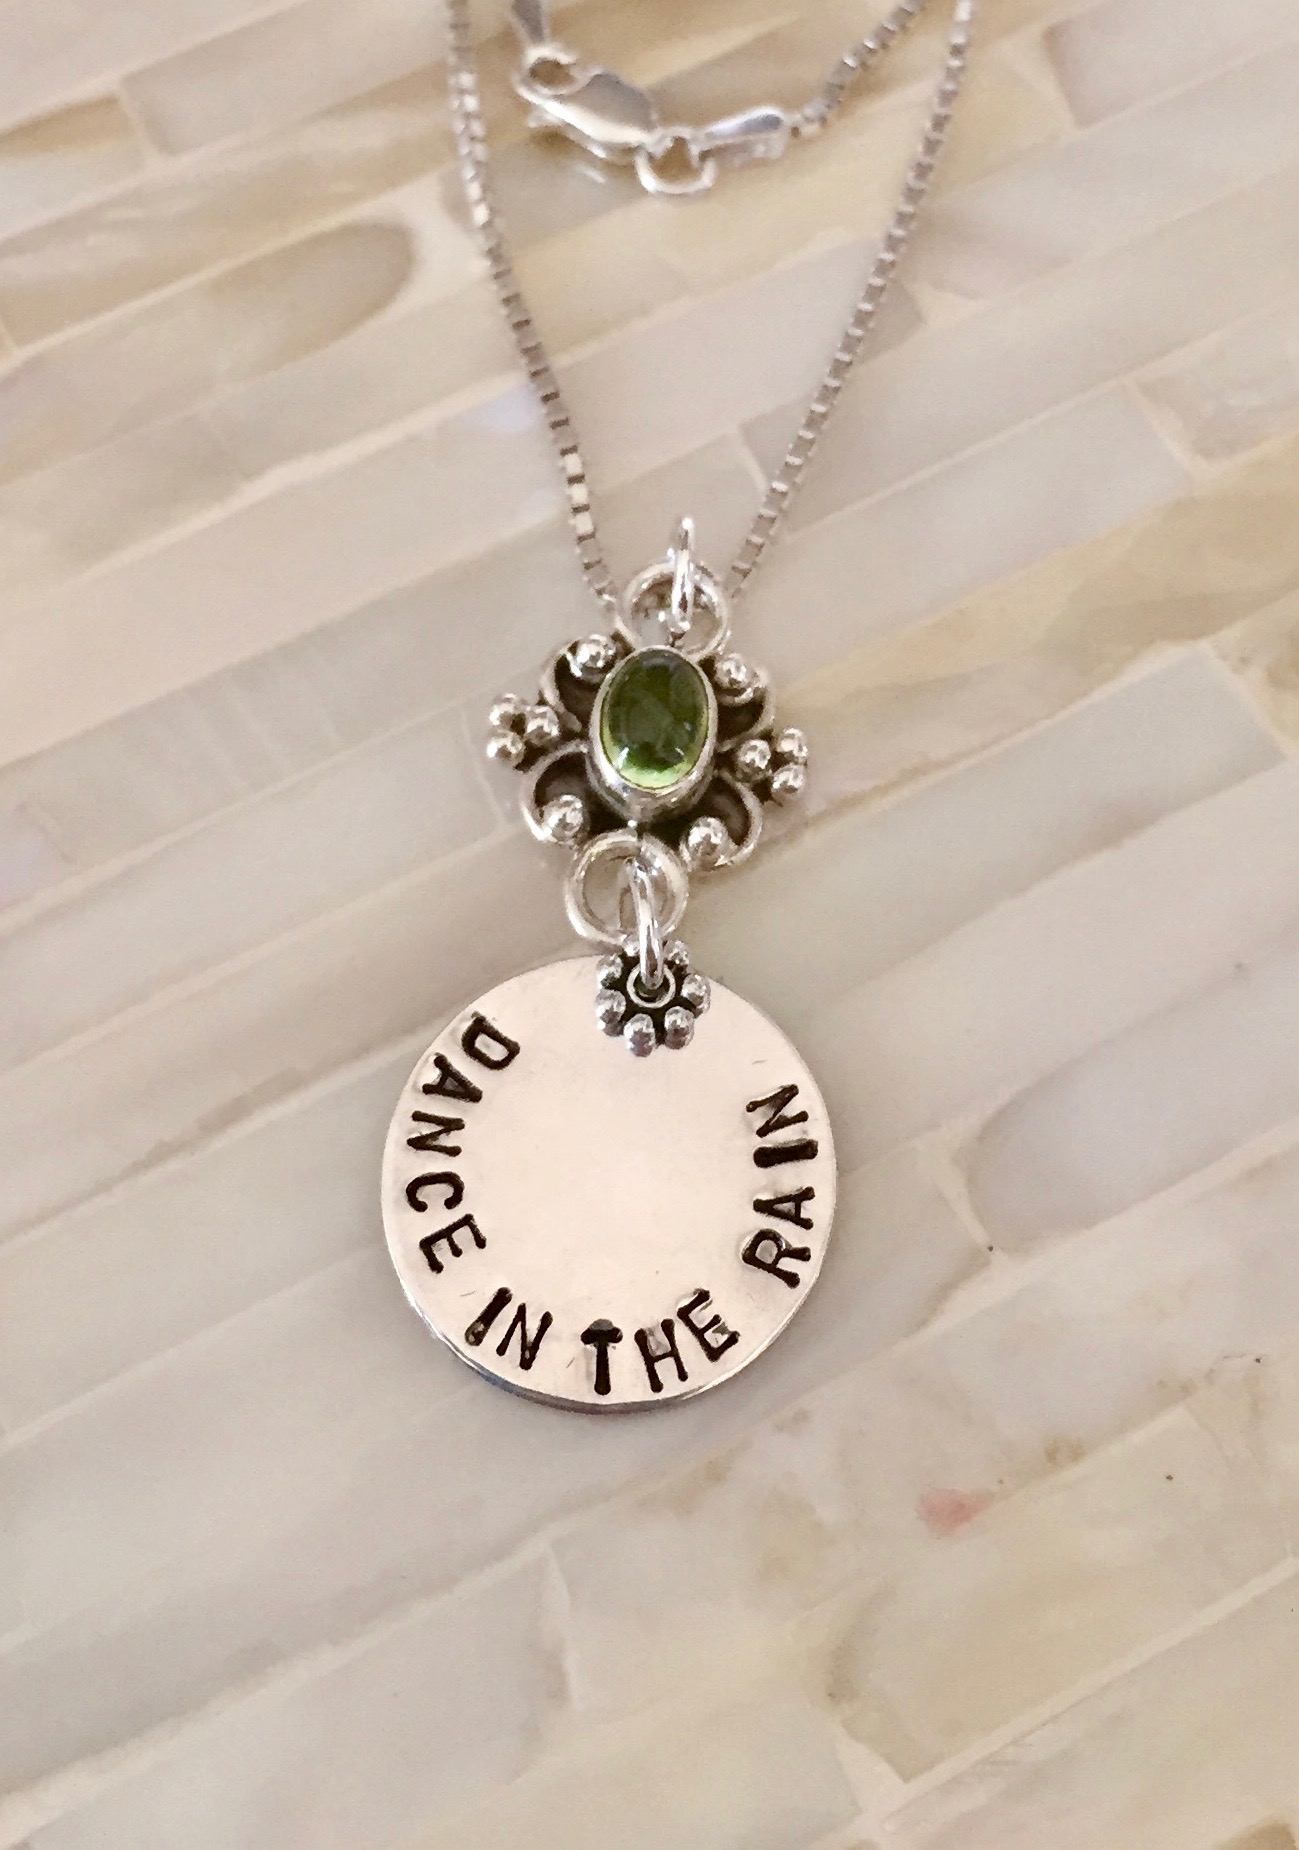 Mothers grandmother personalized gemstone necklace